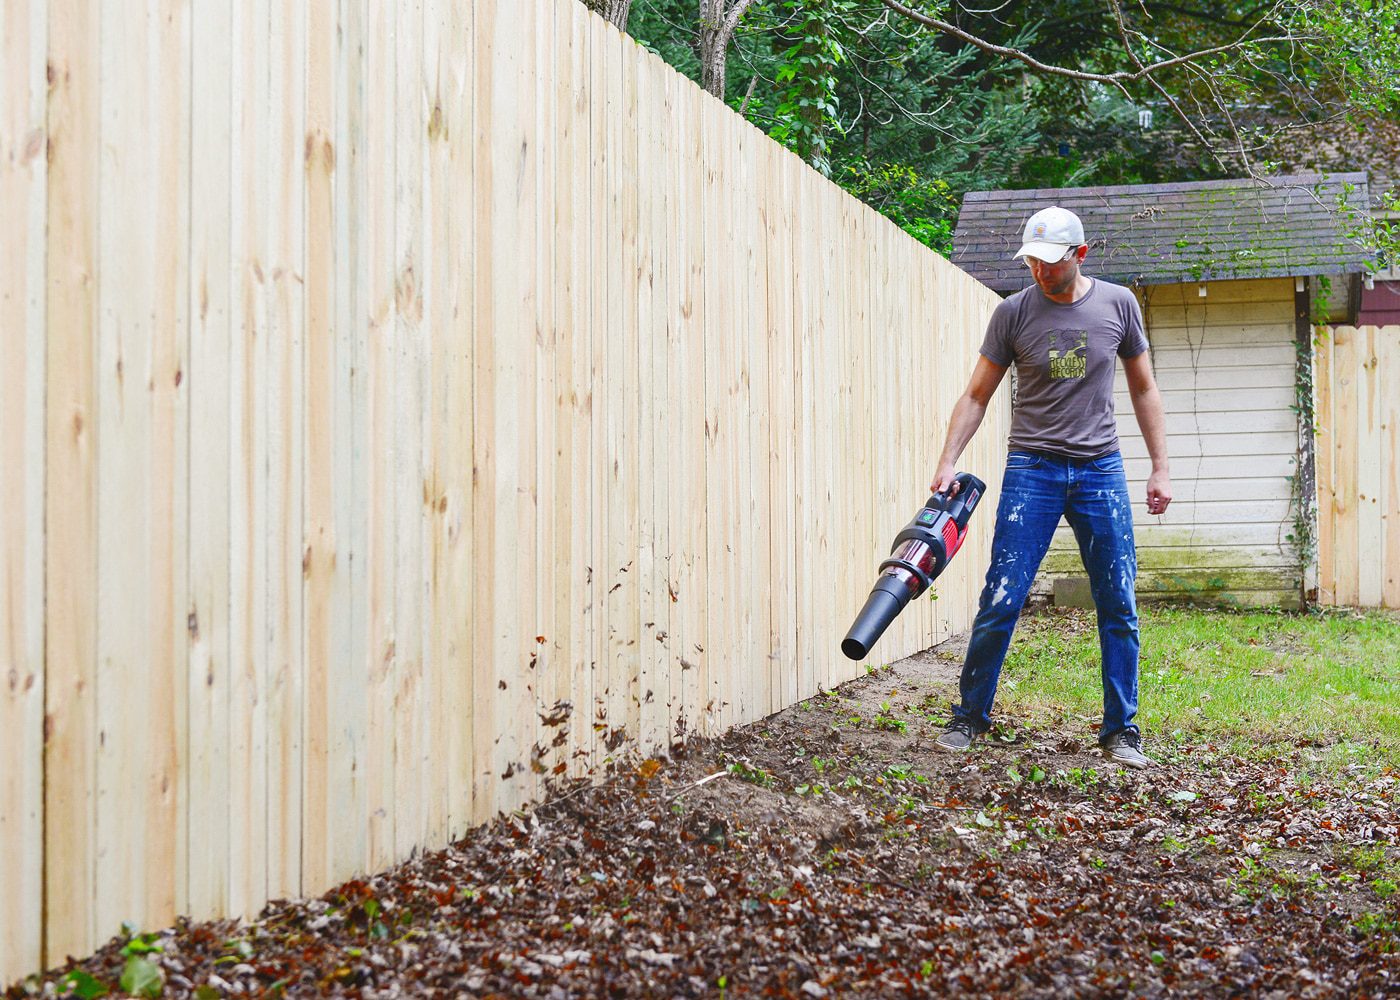 Our 3 day 'Flip the Yard' backyard makeover with Troy-Bilt | via Yellow Brick Home